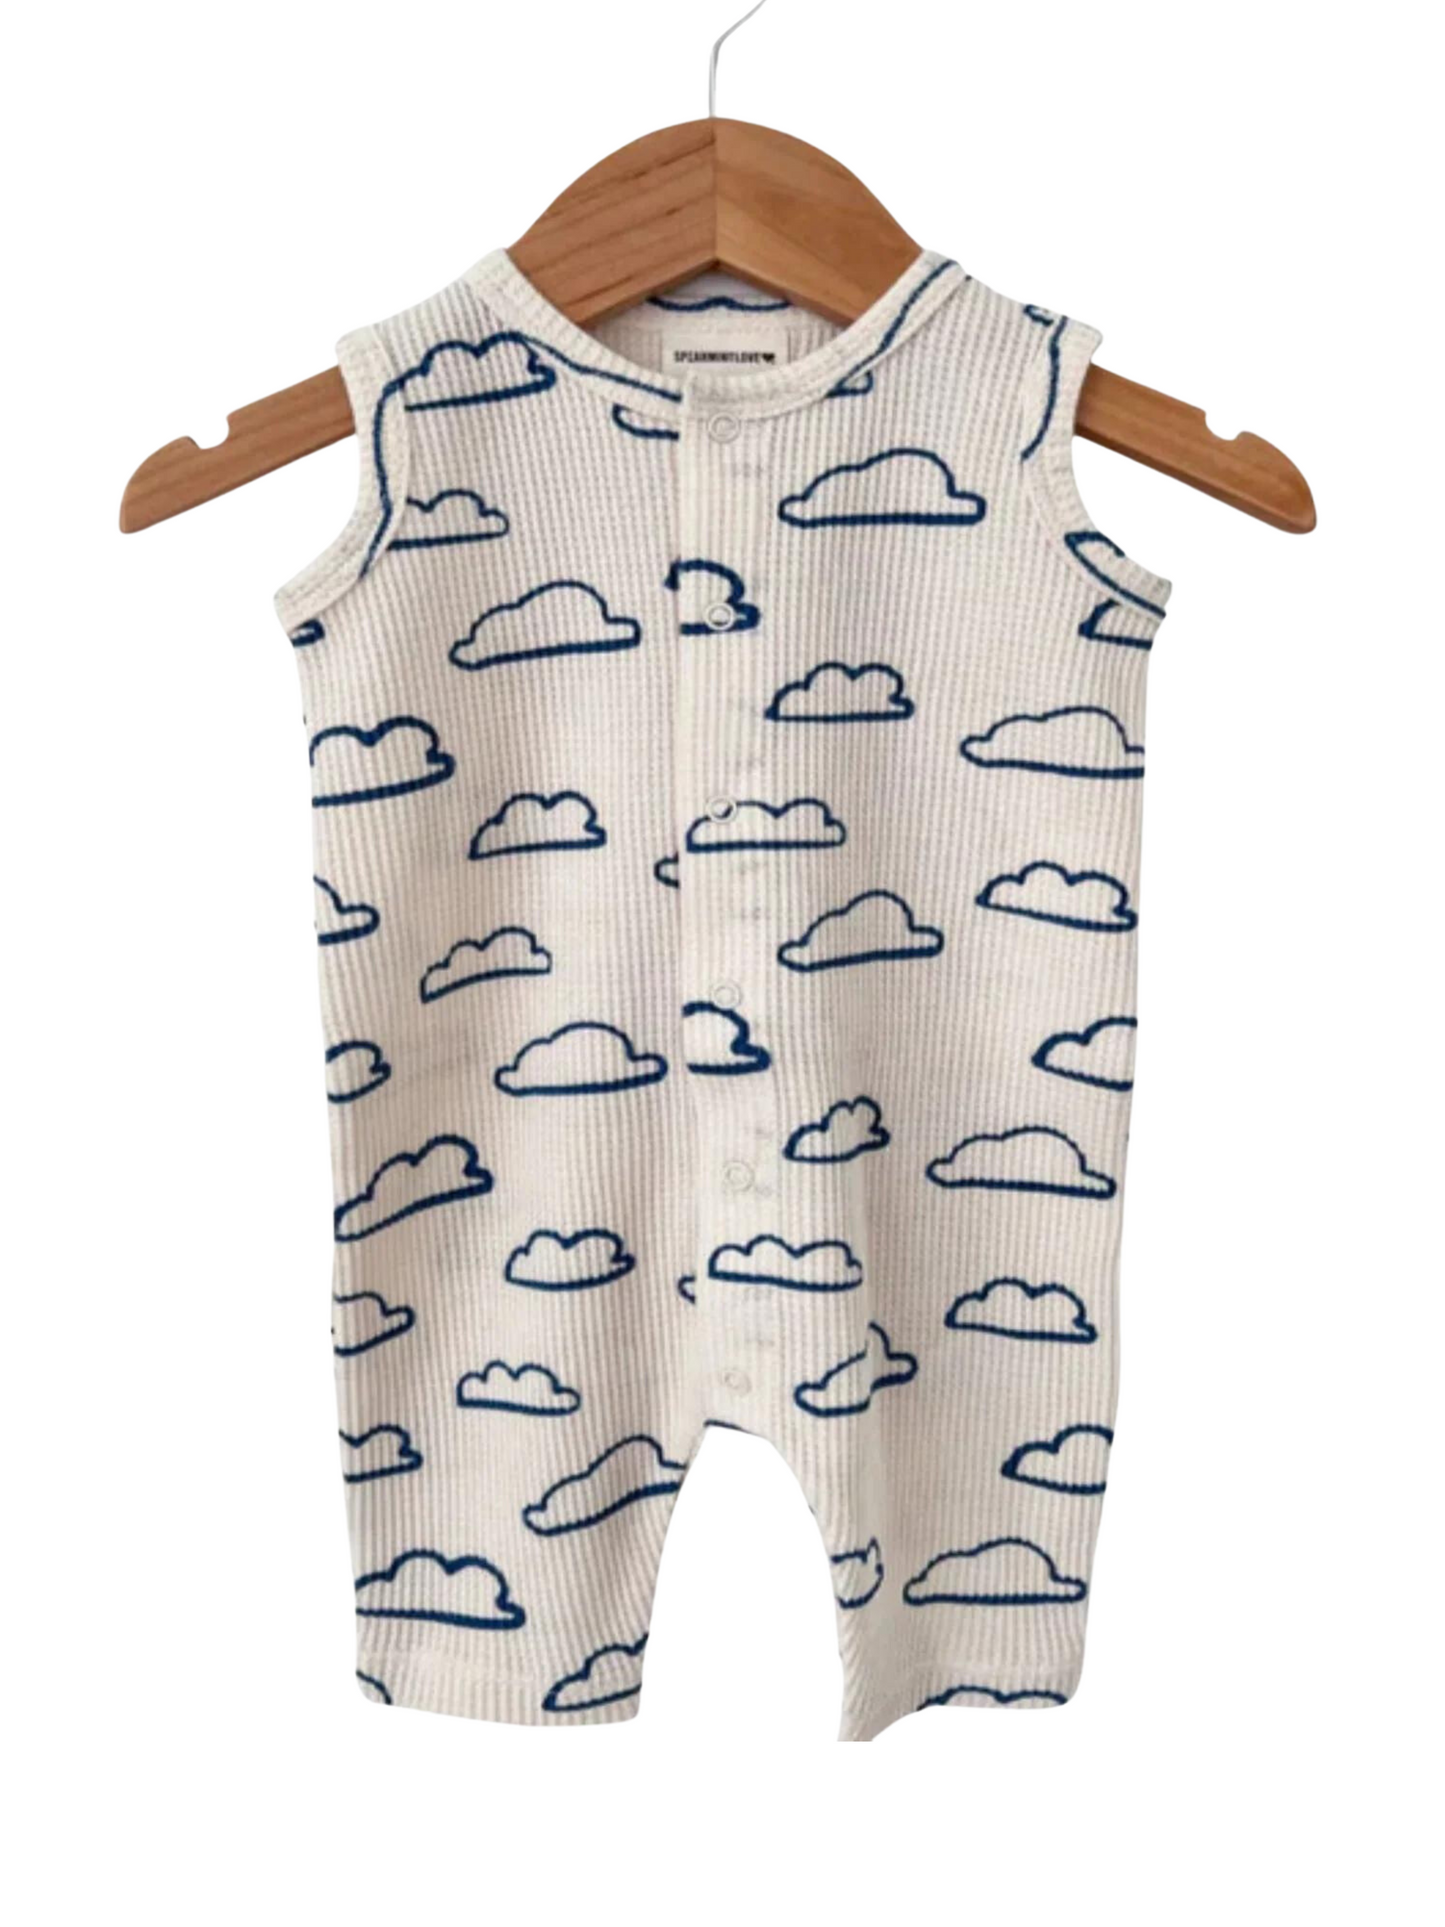 BABY ROMPER - ORGANIC WAFFLE KNIT IN CLOUD - THE LITTLE EAGLE BOUTIQUE